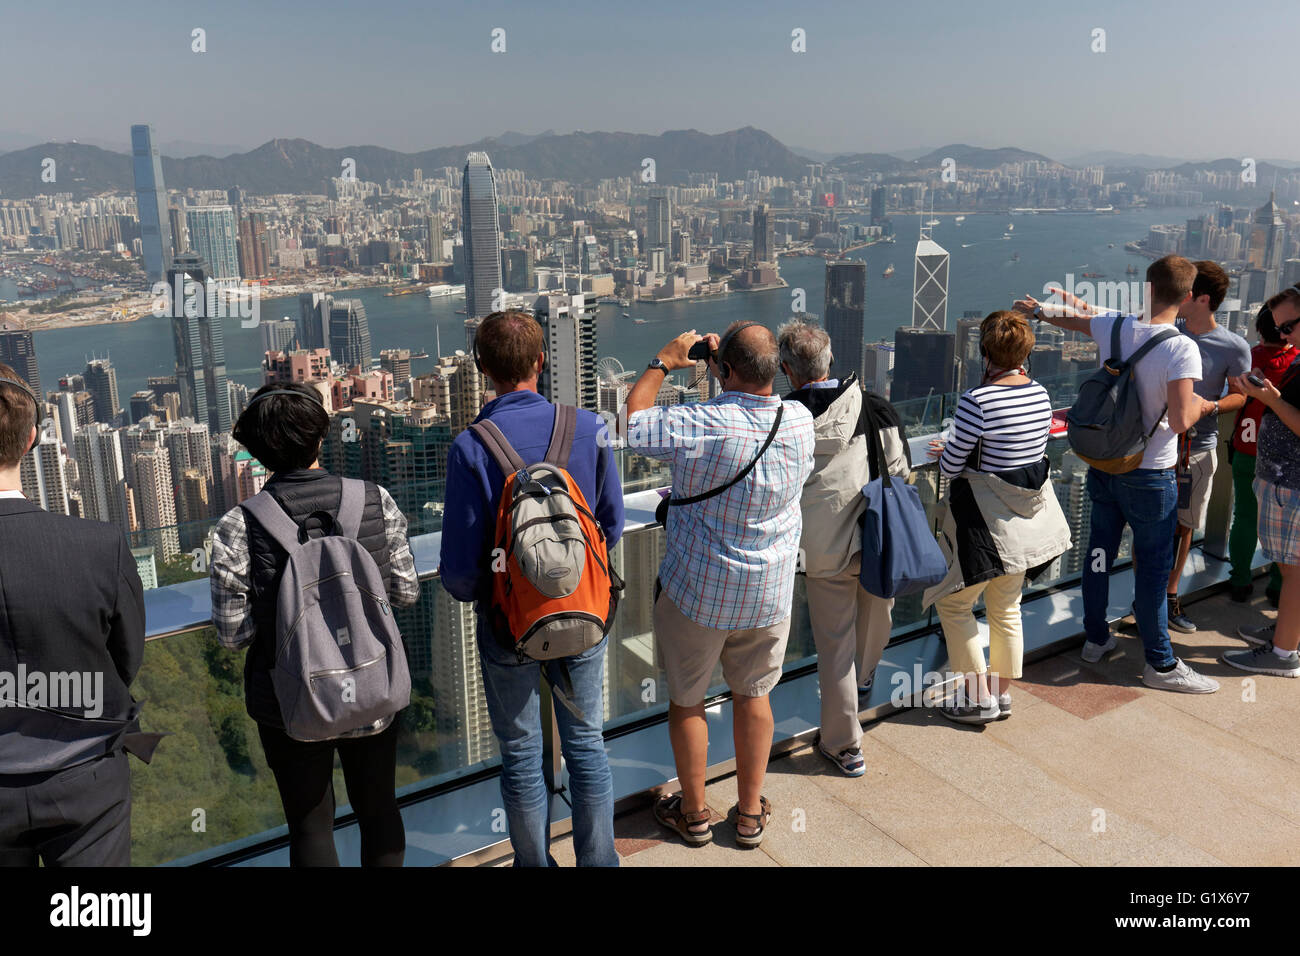 Tourists on the observation deck of The Peak, Victoria Peak, View of Victoria Harbour and Kowloon, Hong Kong Island, Hong Kong Stock Photo